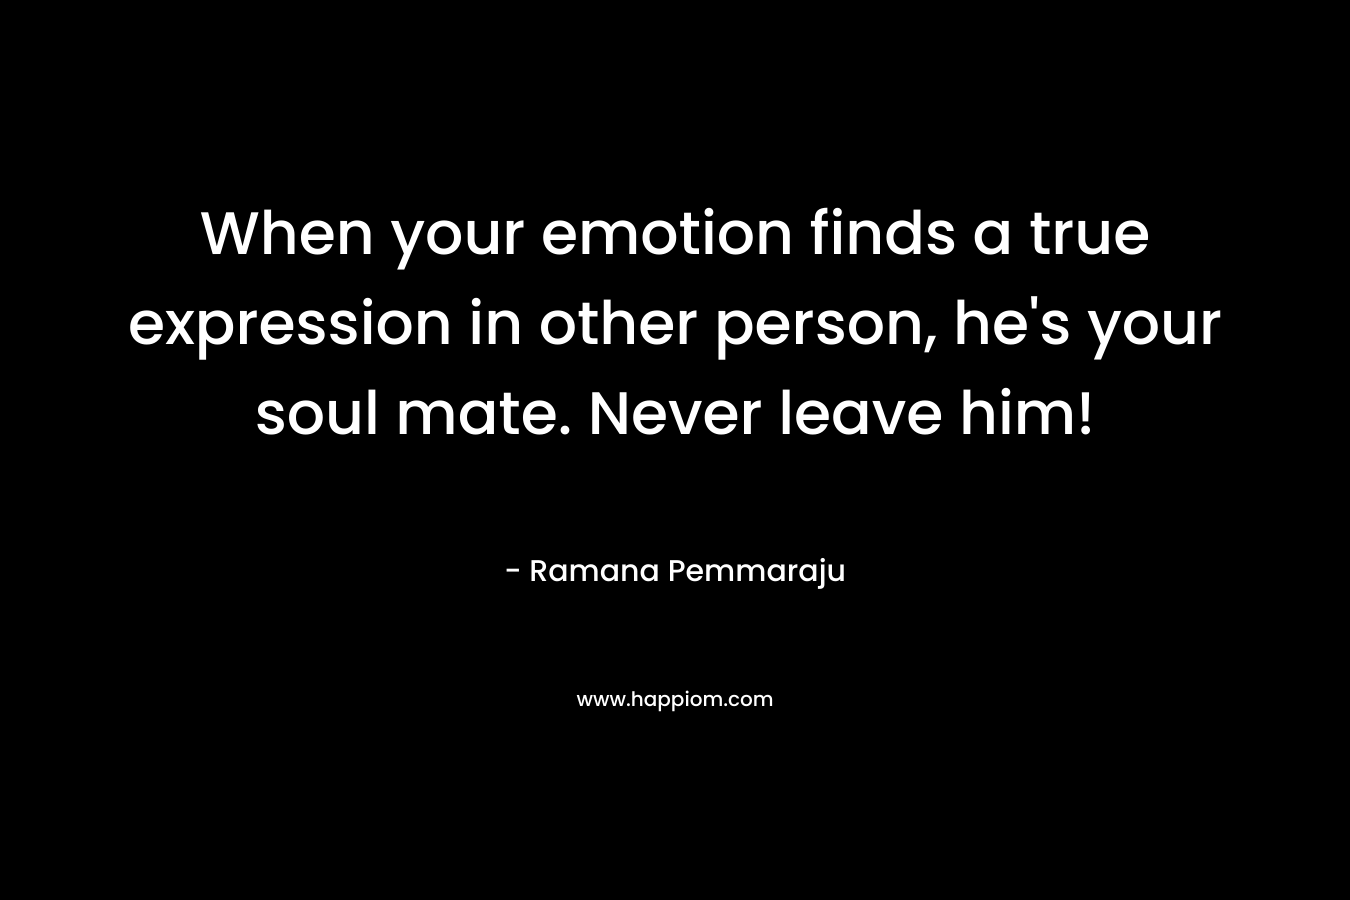 When your emotion finds a true expression in other person, he's your soul mate. Never leave him!